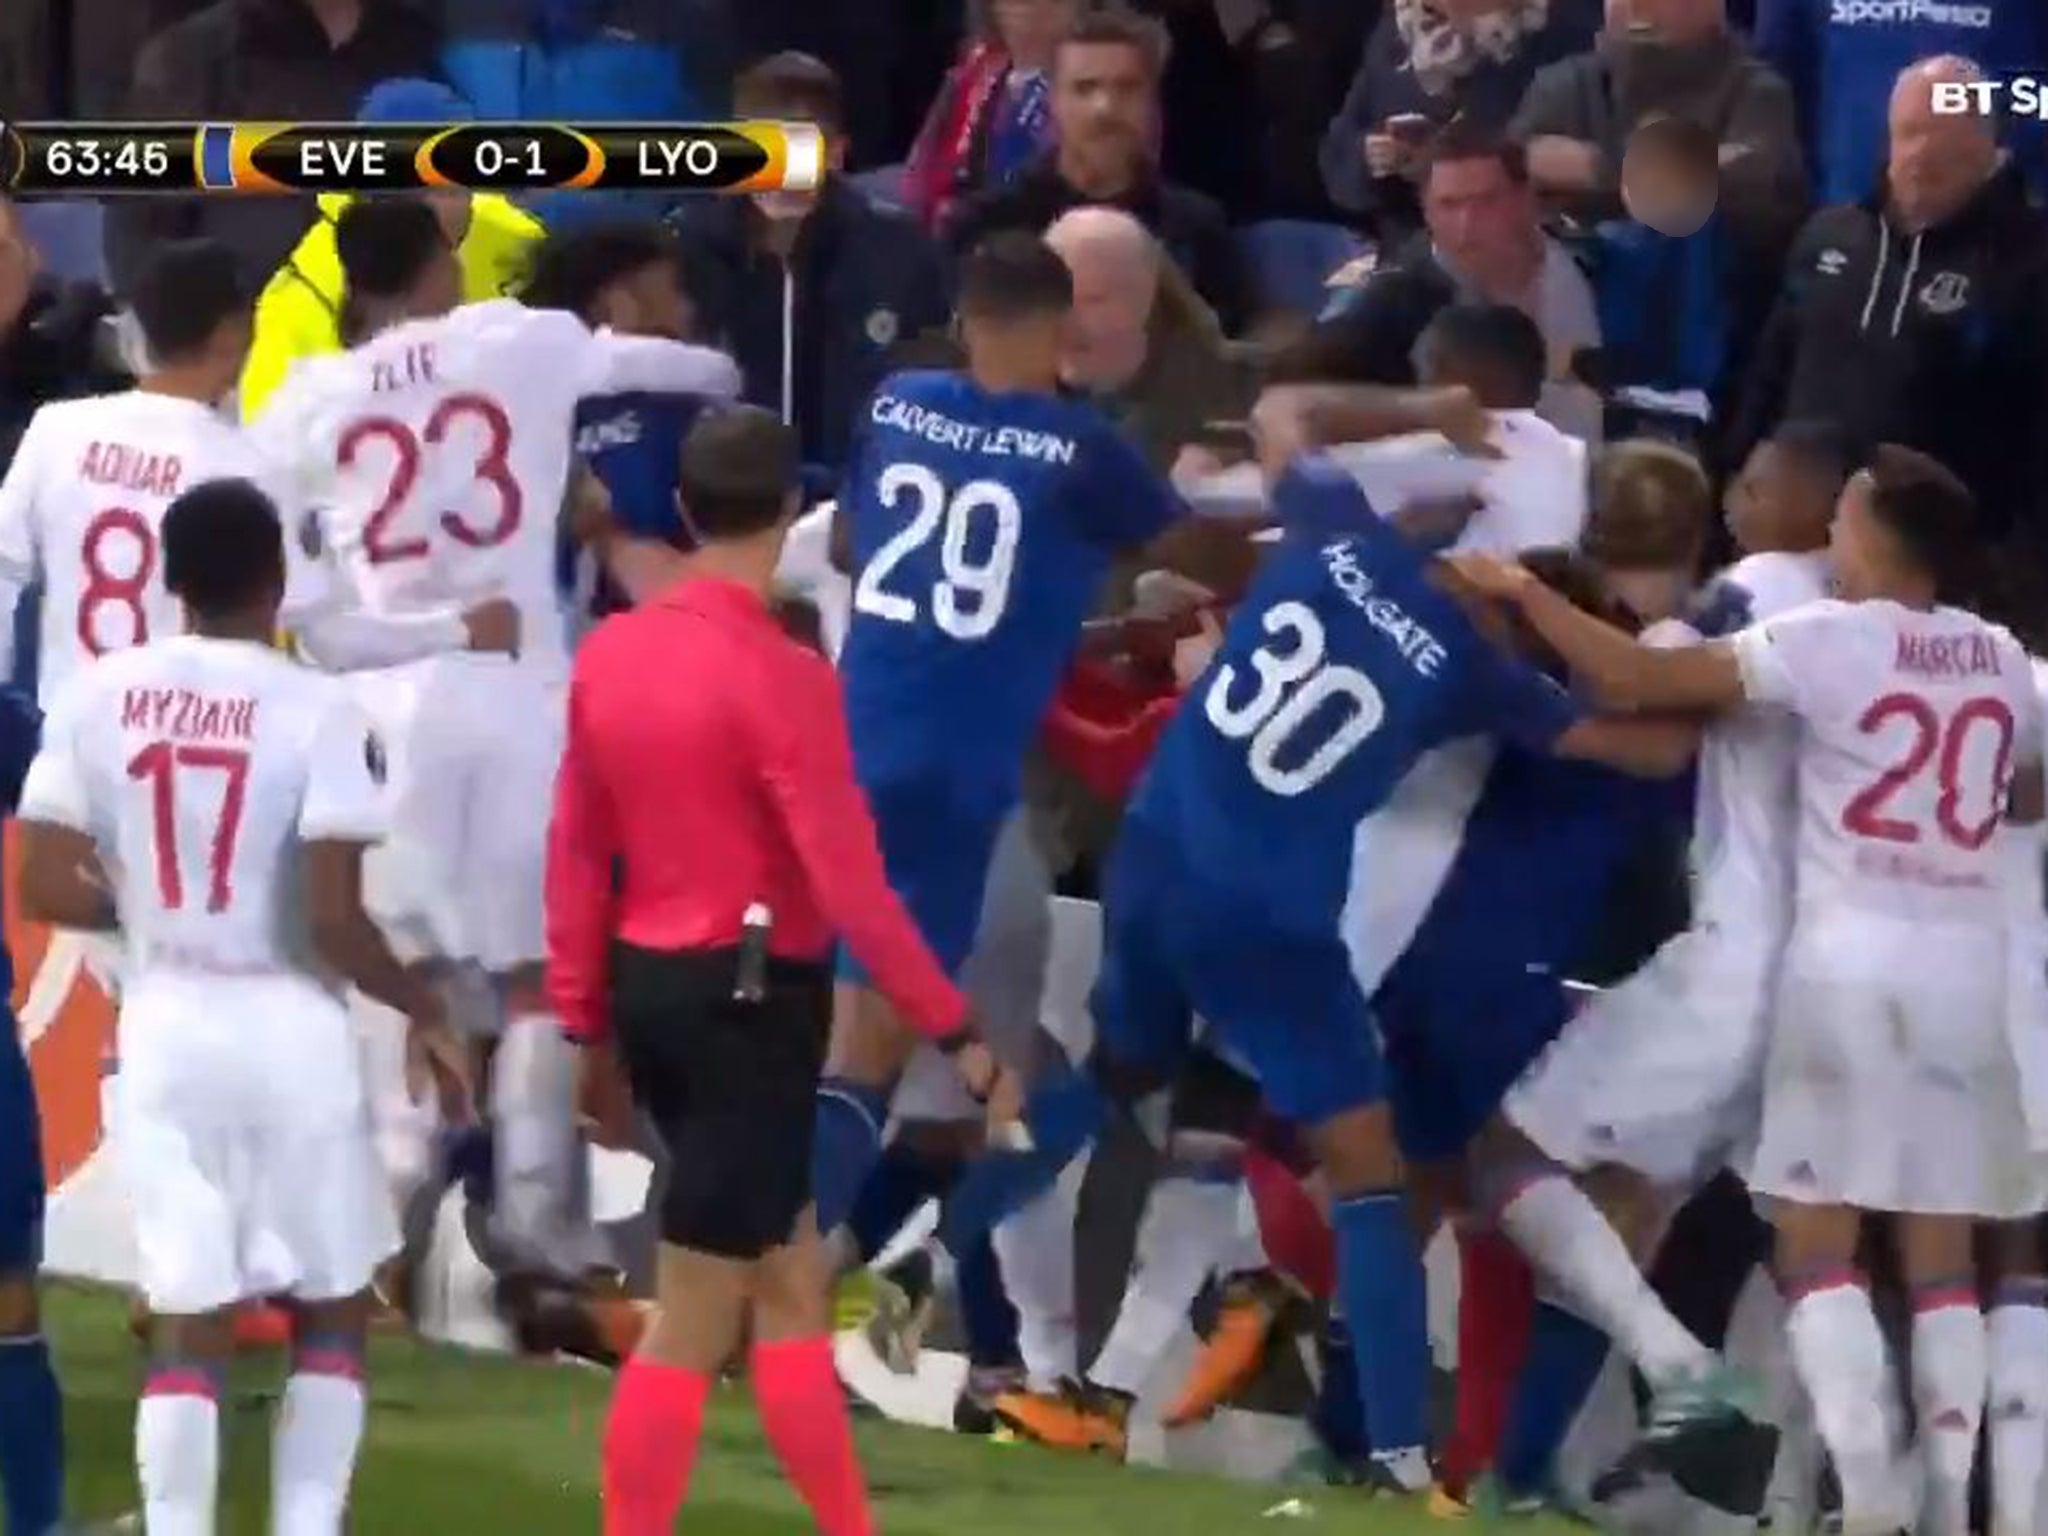 Everton and Lyon fans brawl while a fan tries to hit a player while holding his son